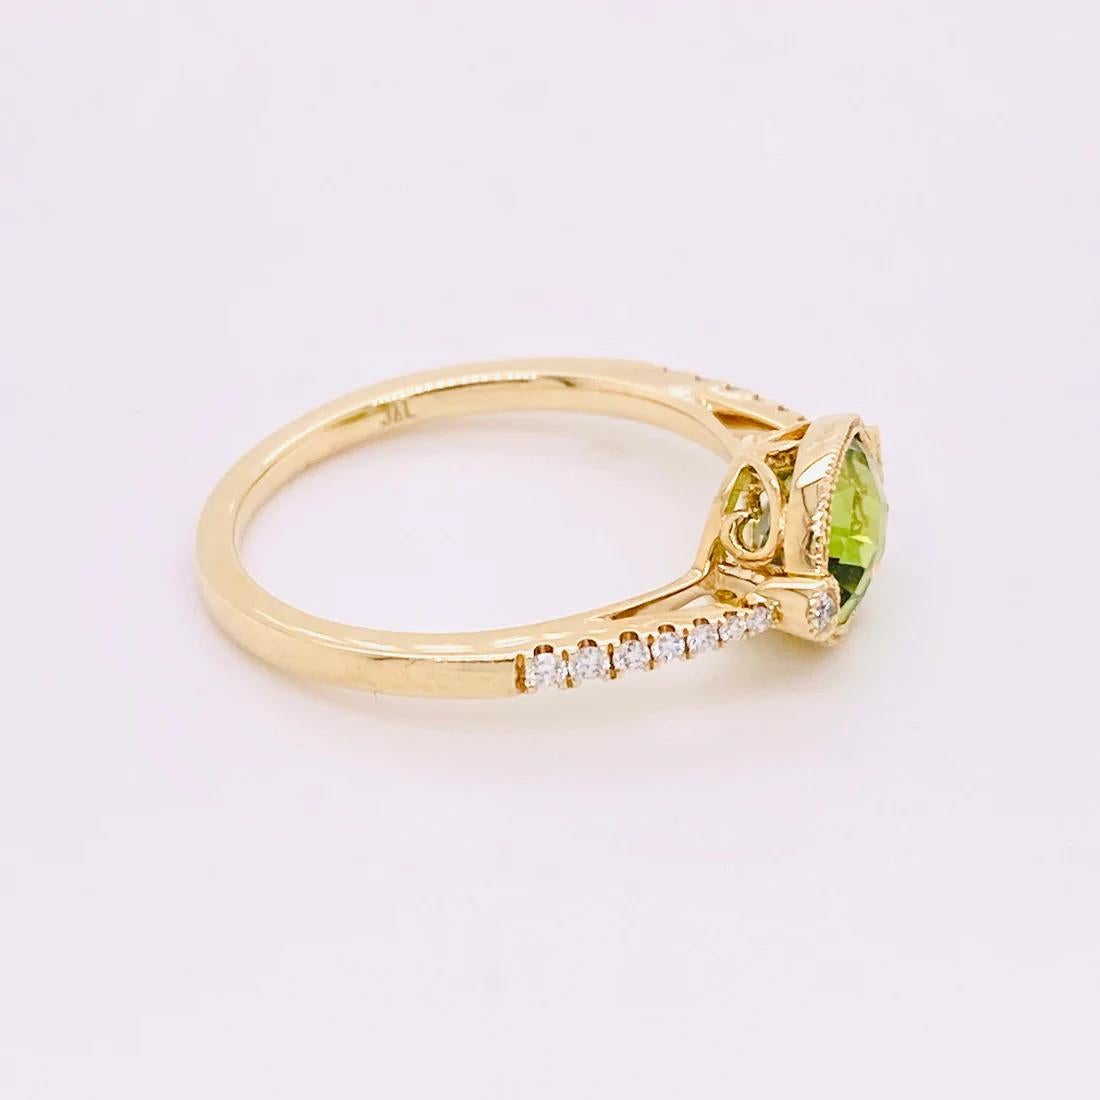 This stunning green peridot will look stunning on you! The genuine gemstone is set in a bezel with beaded accents and diamonds on either side. The diamonds are all genuine and natural and create a brilliant accent for the peridot. Whether you are